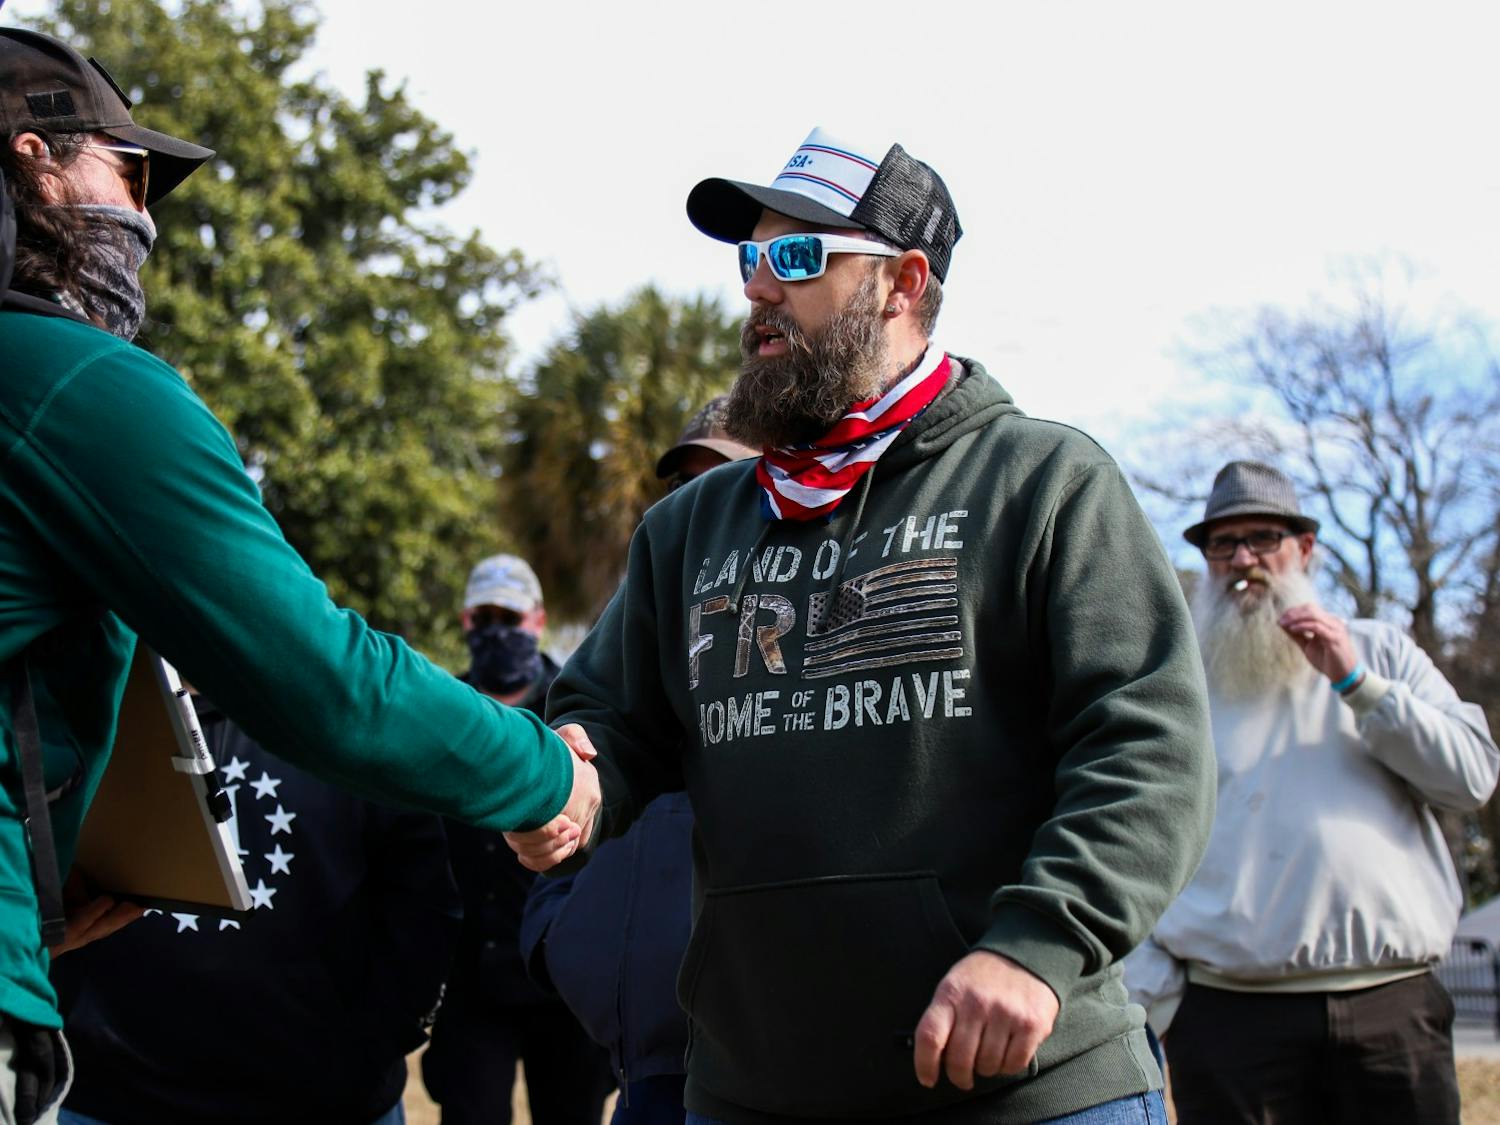 Shawn Laurie of the “Drive4America” caravan shakes the hand of one of the counter-protesters. Many protesters shook hands after a discussion.&nbsp;